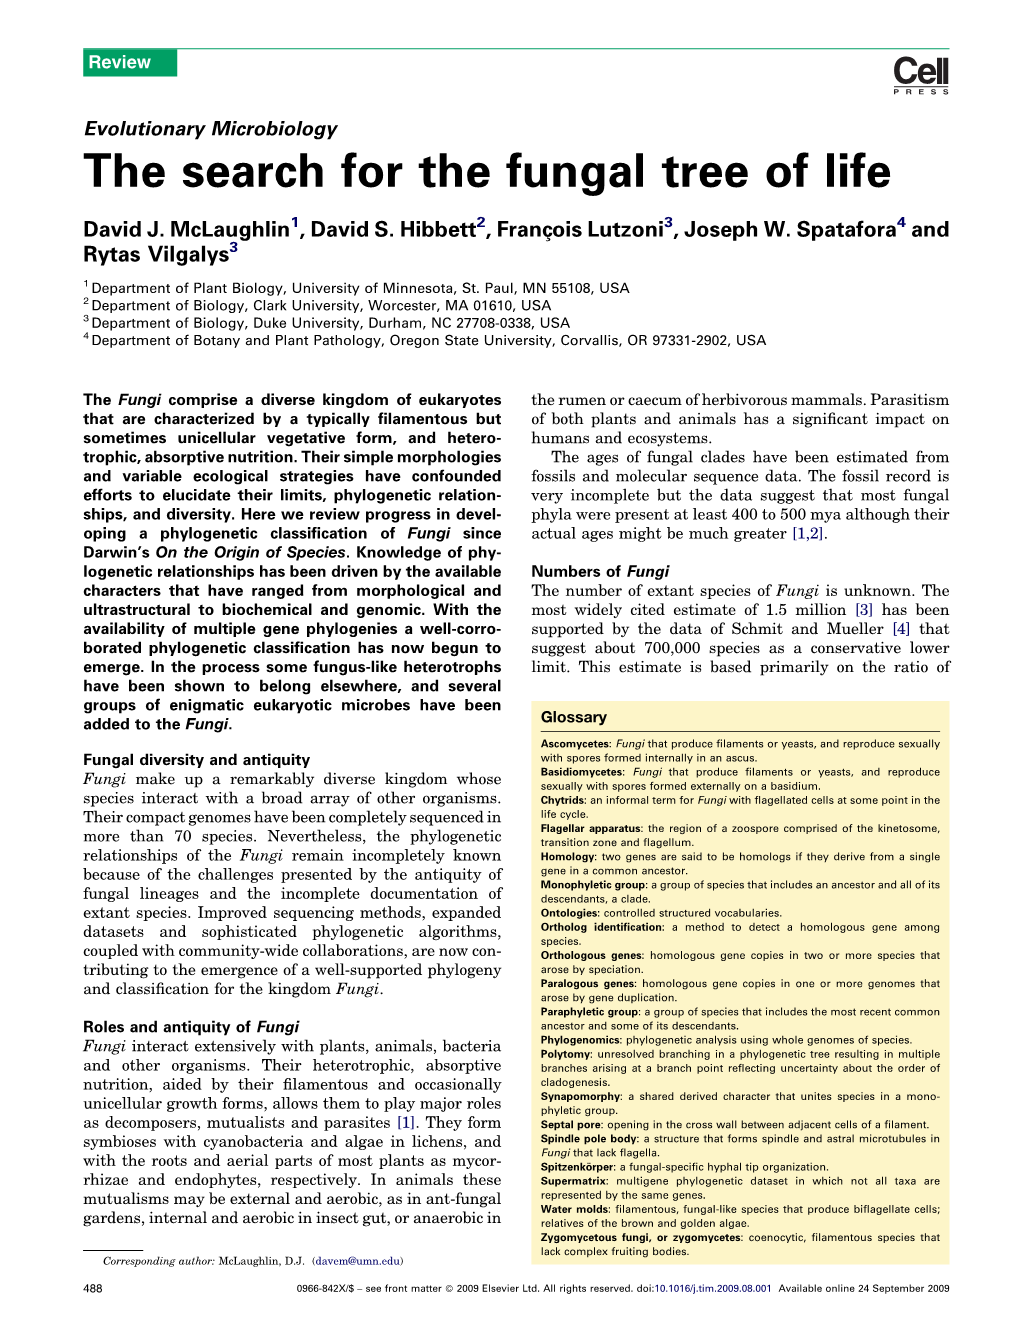 The Search for the Fungal Tree of Life